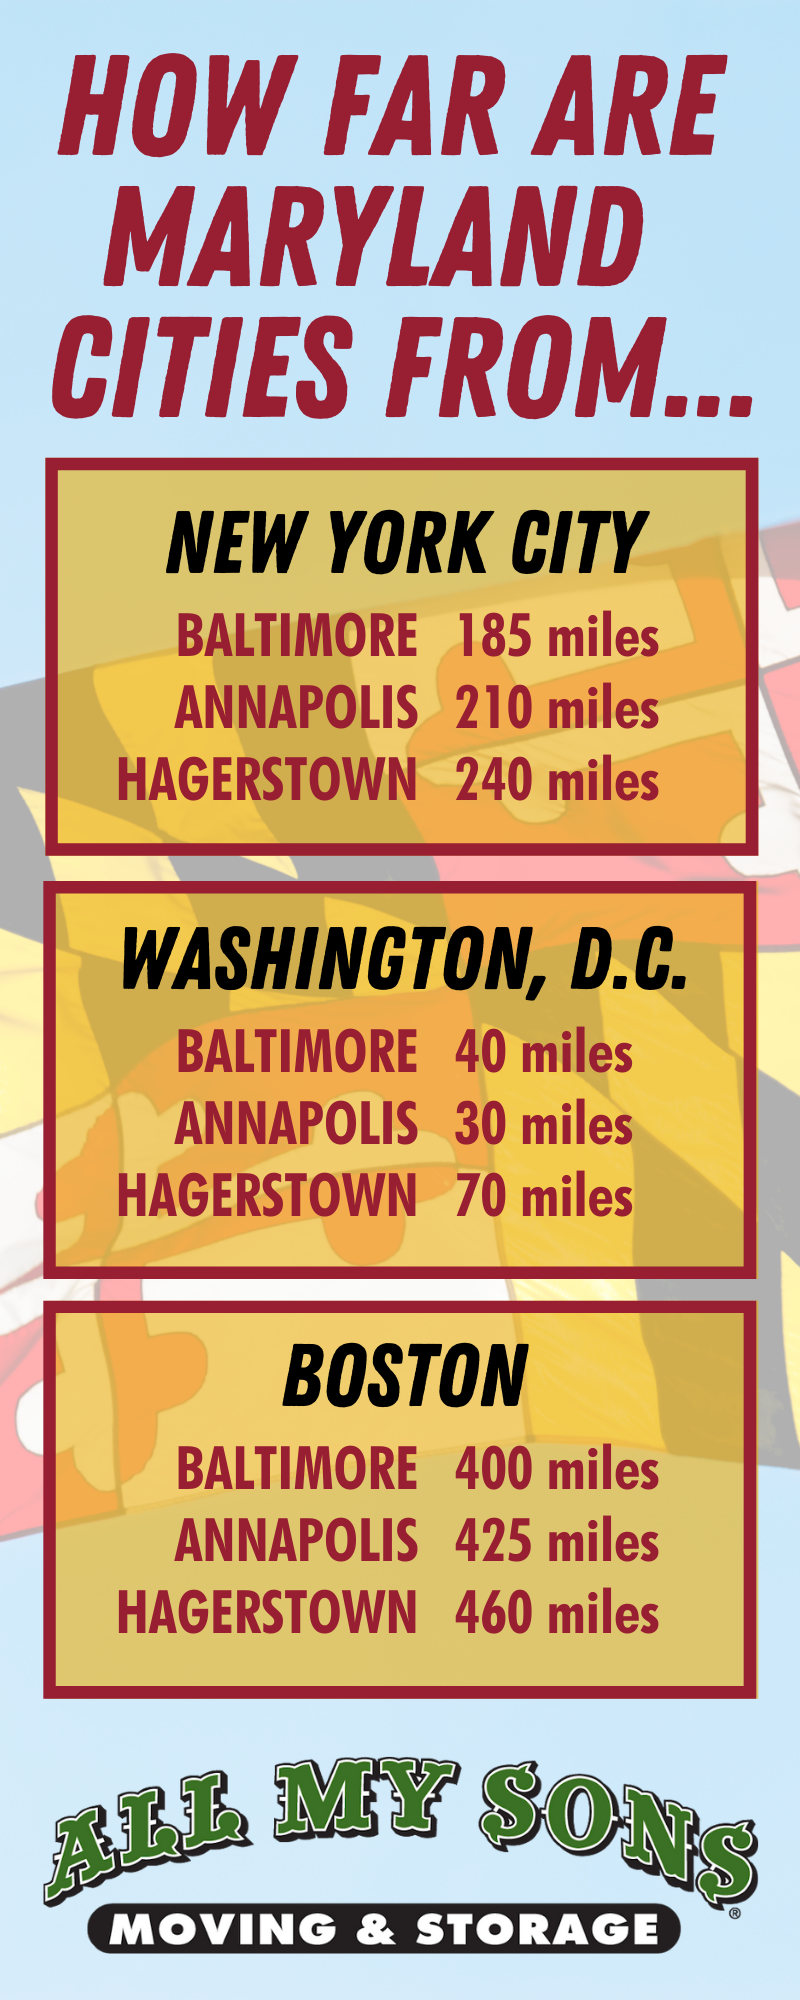 How Far Are Maryland Cities from New York, Washington DC, and Boston